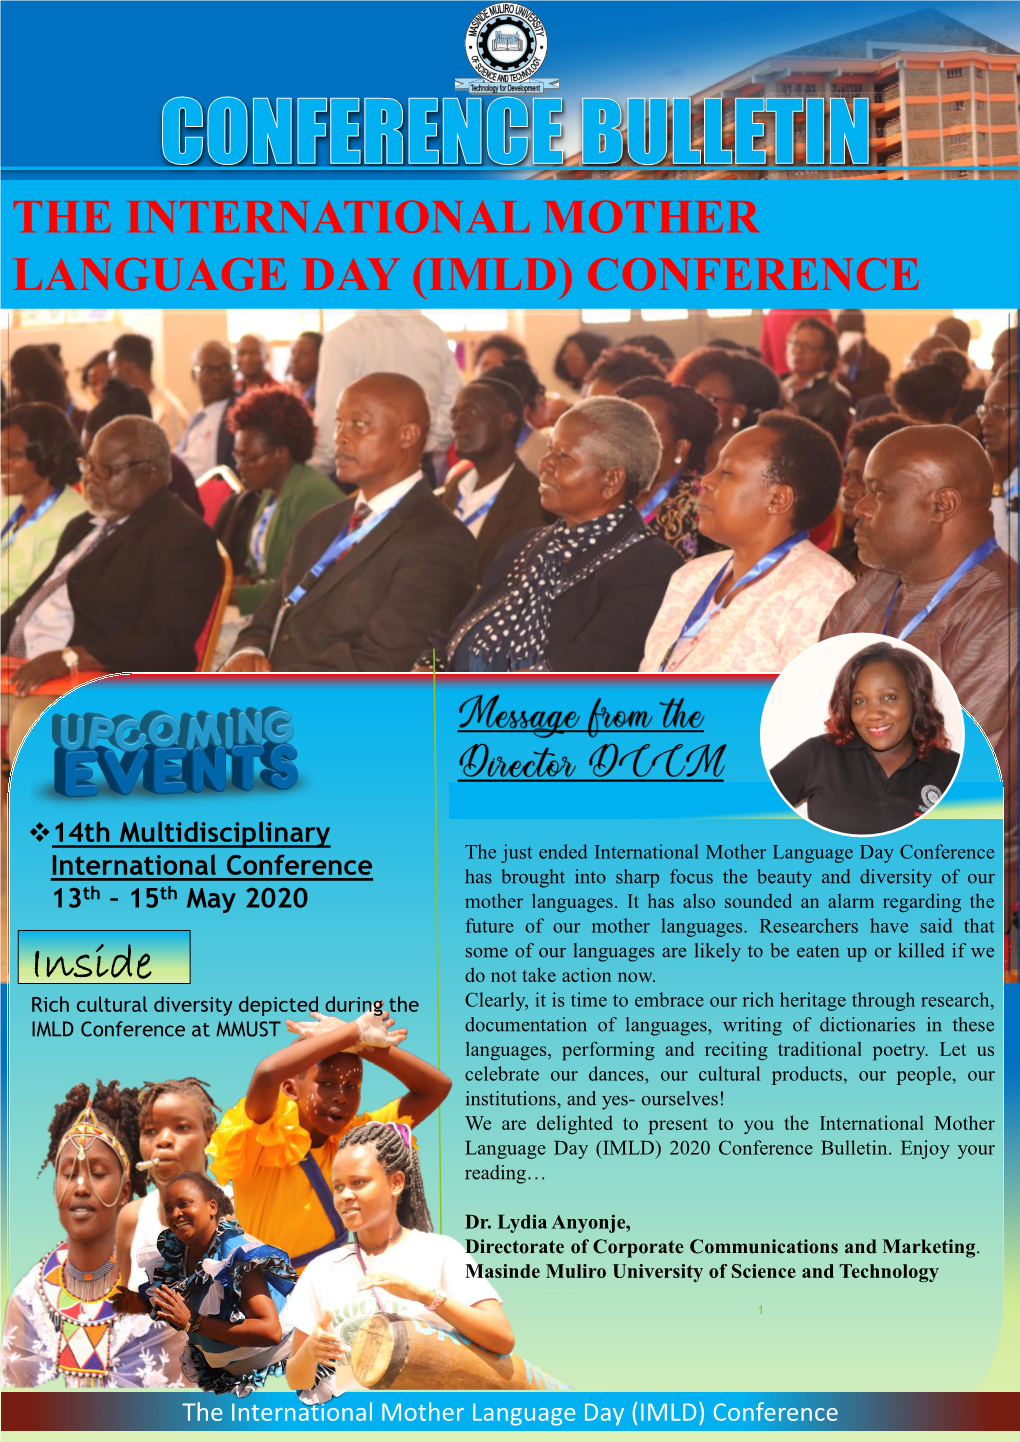 The International Mother Language Day (Imld) Conference